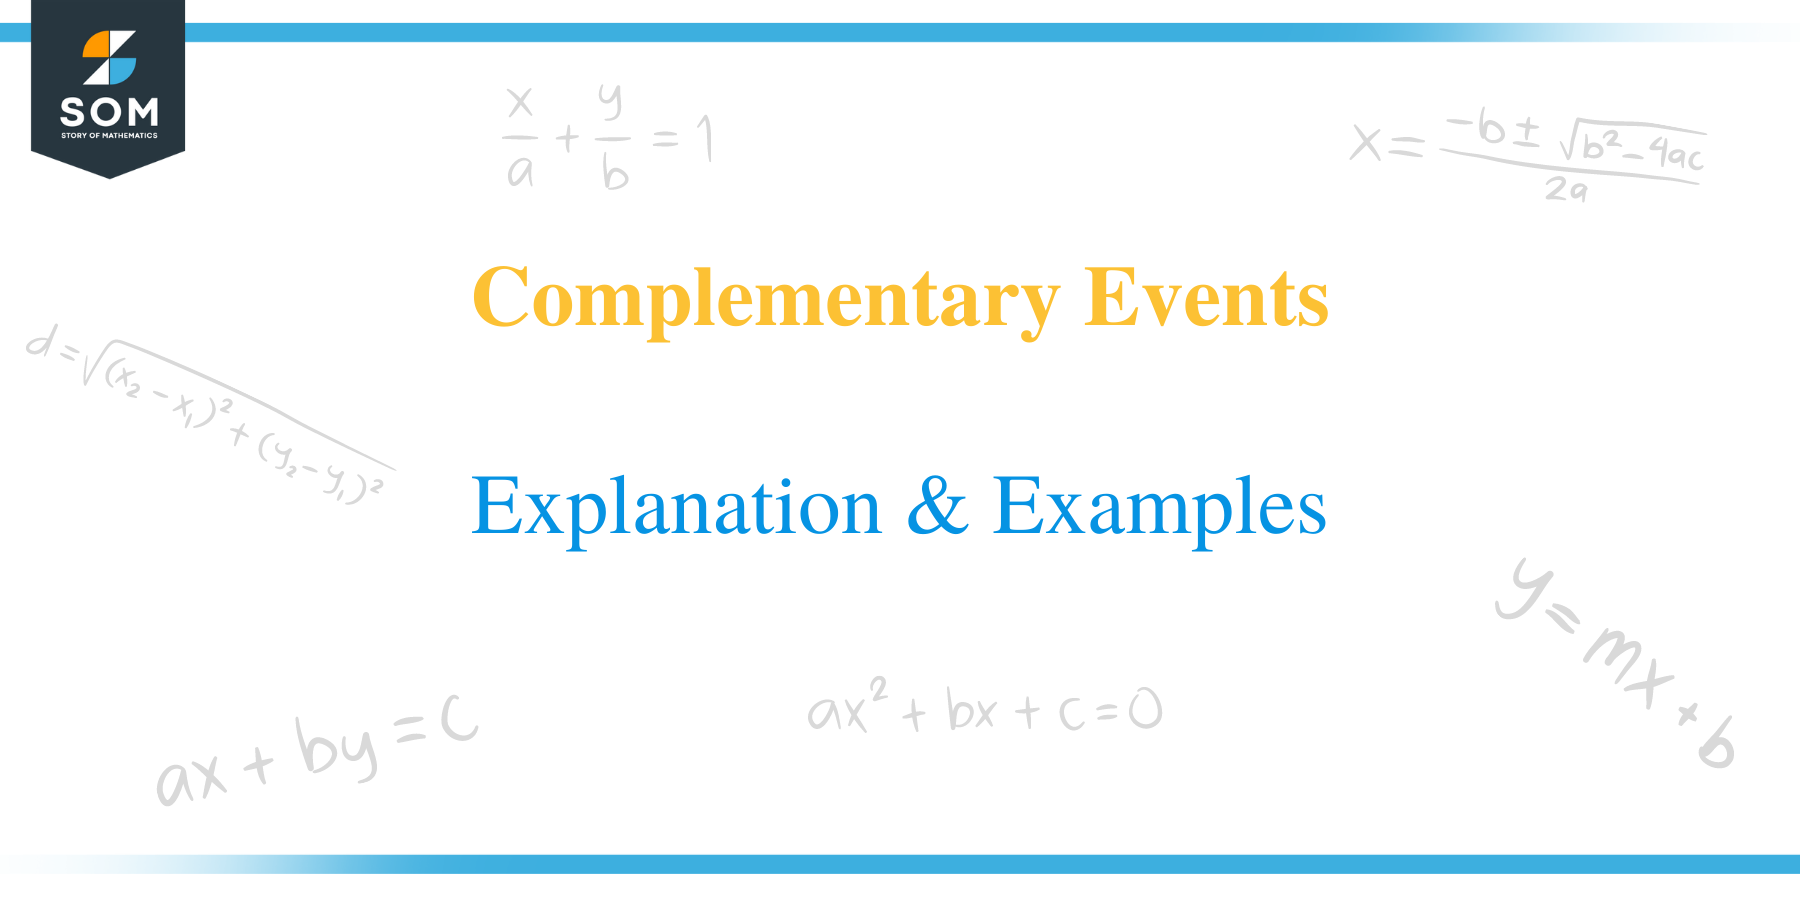 Complementary events title